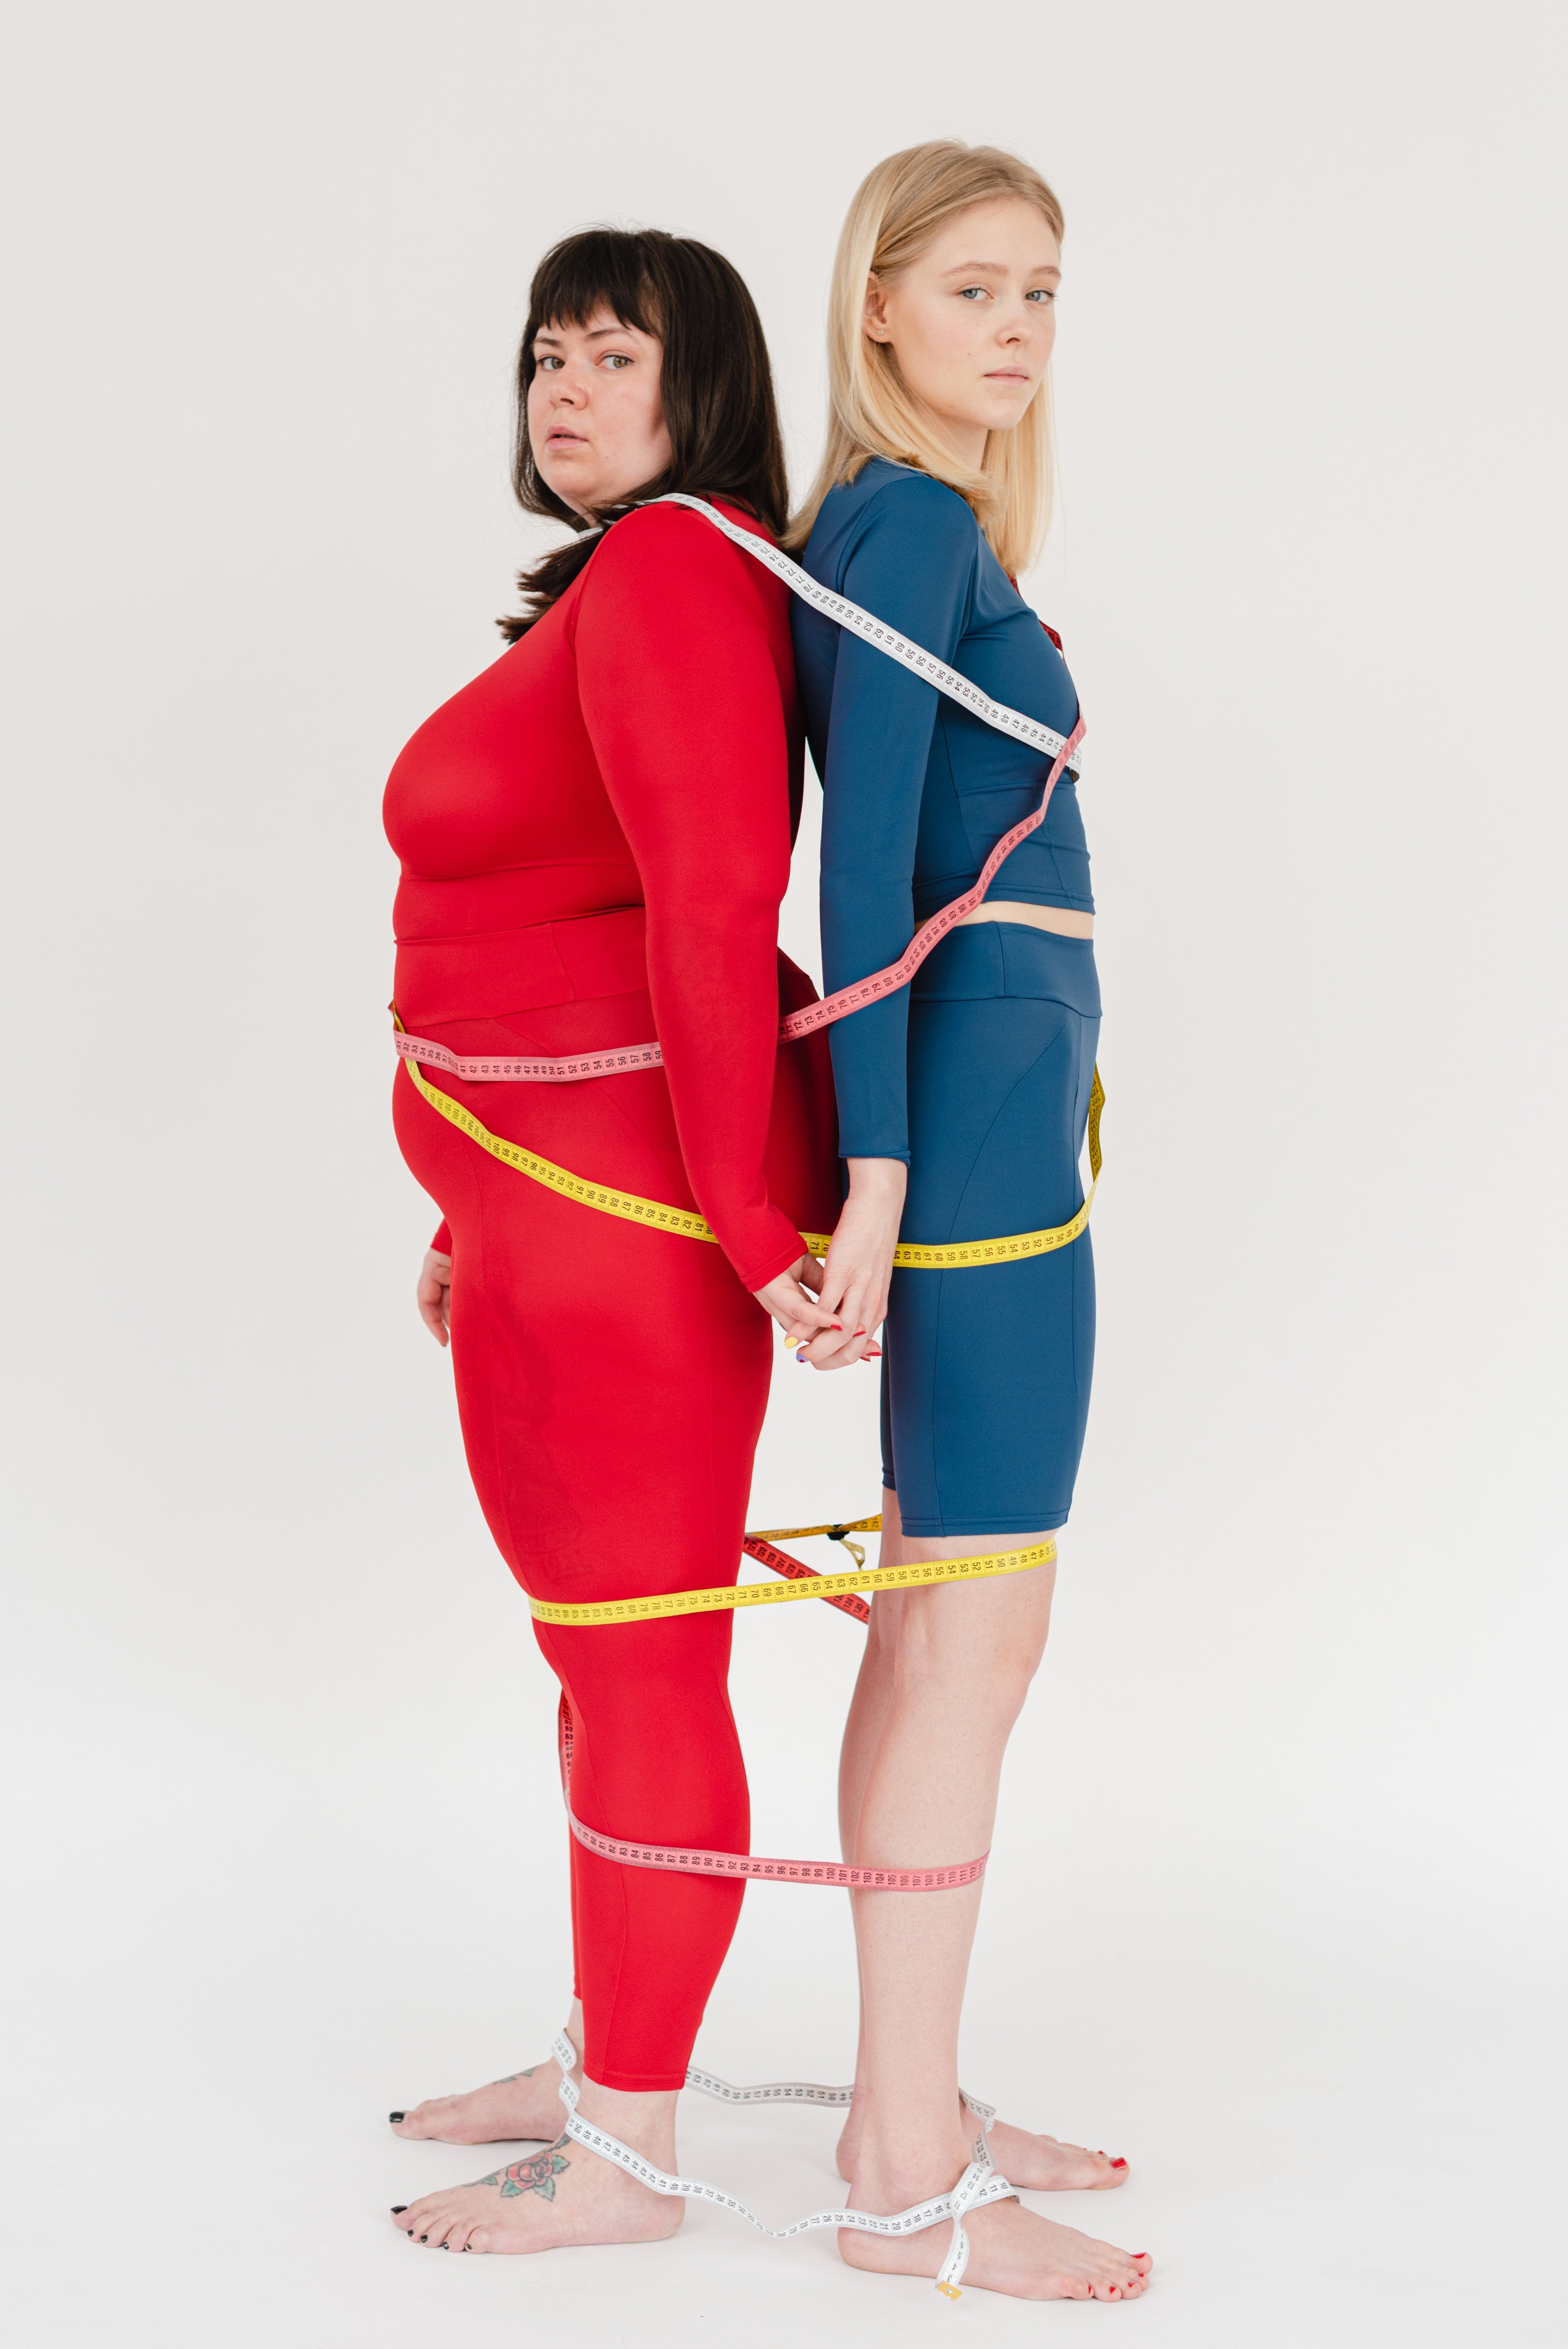 Two women standing back to back with measuring tapes around them. | Source: Pexels